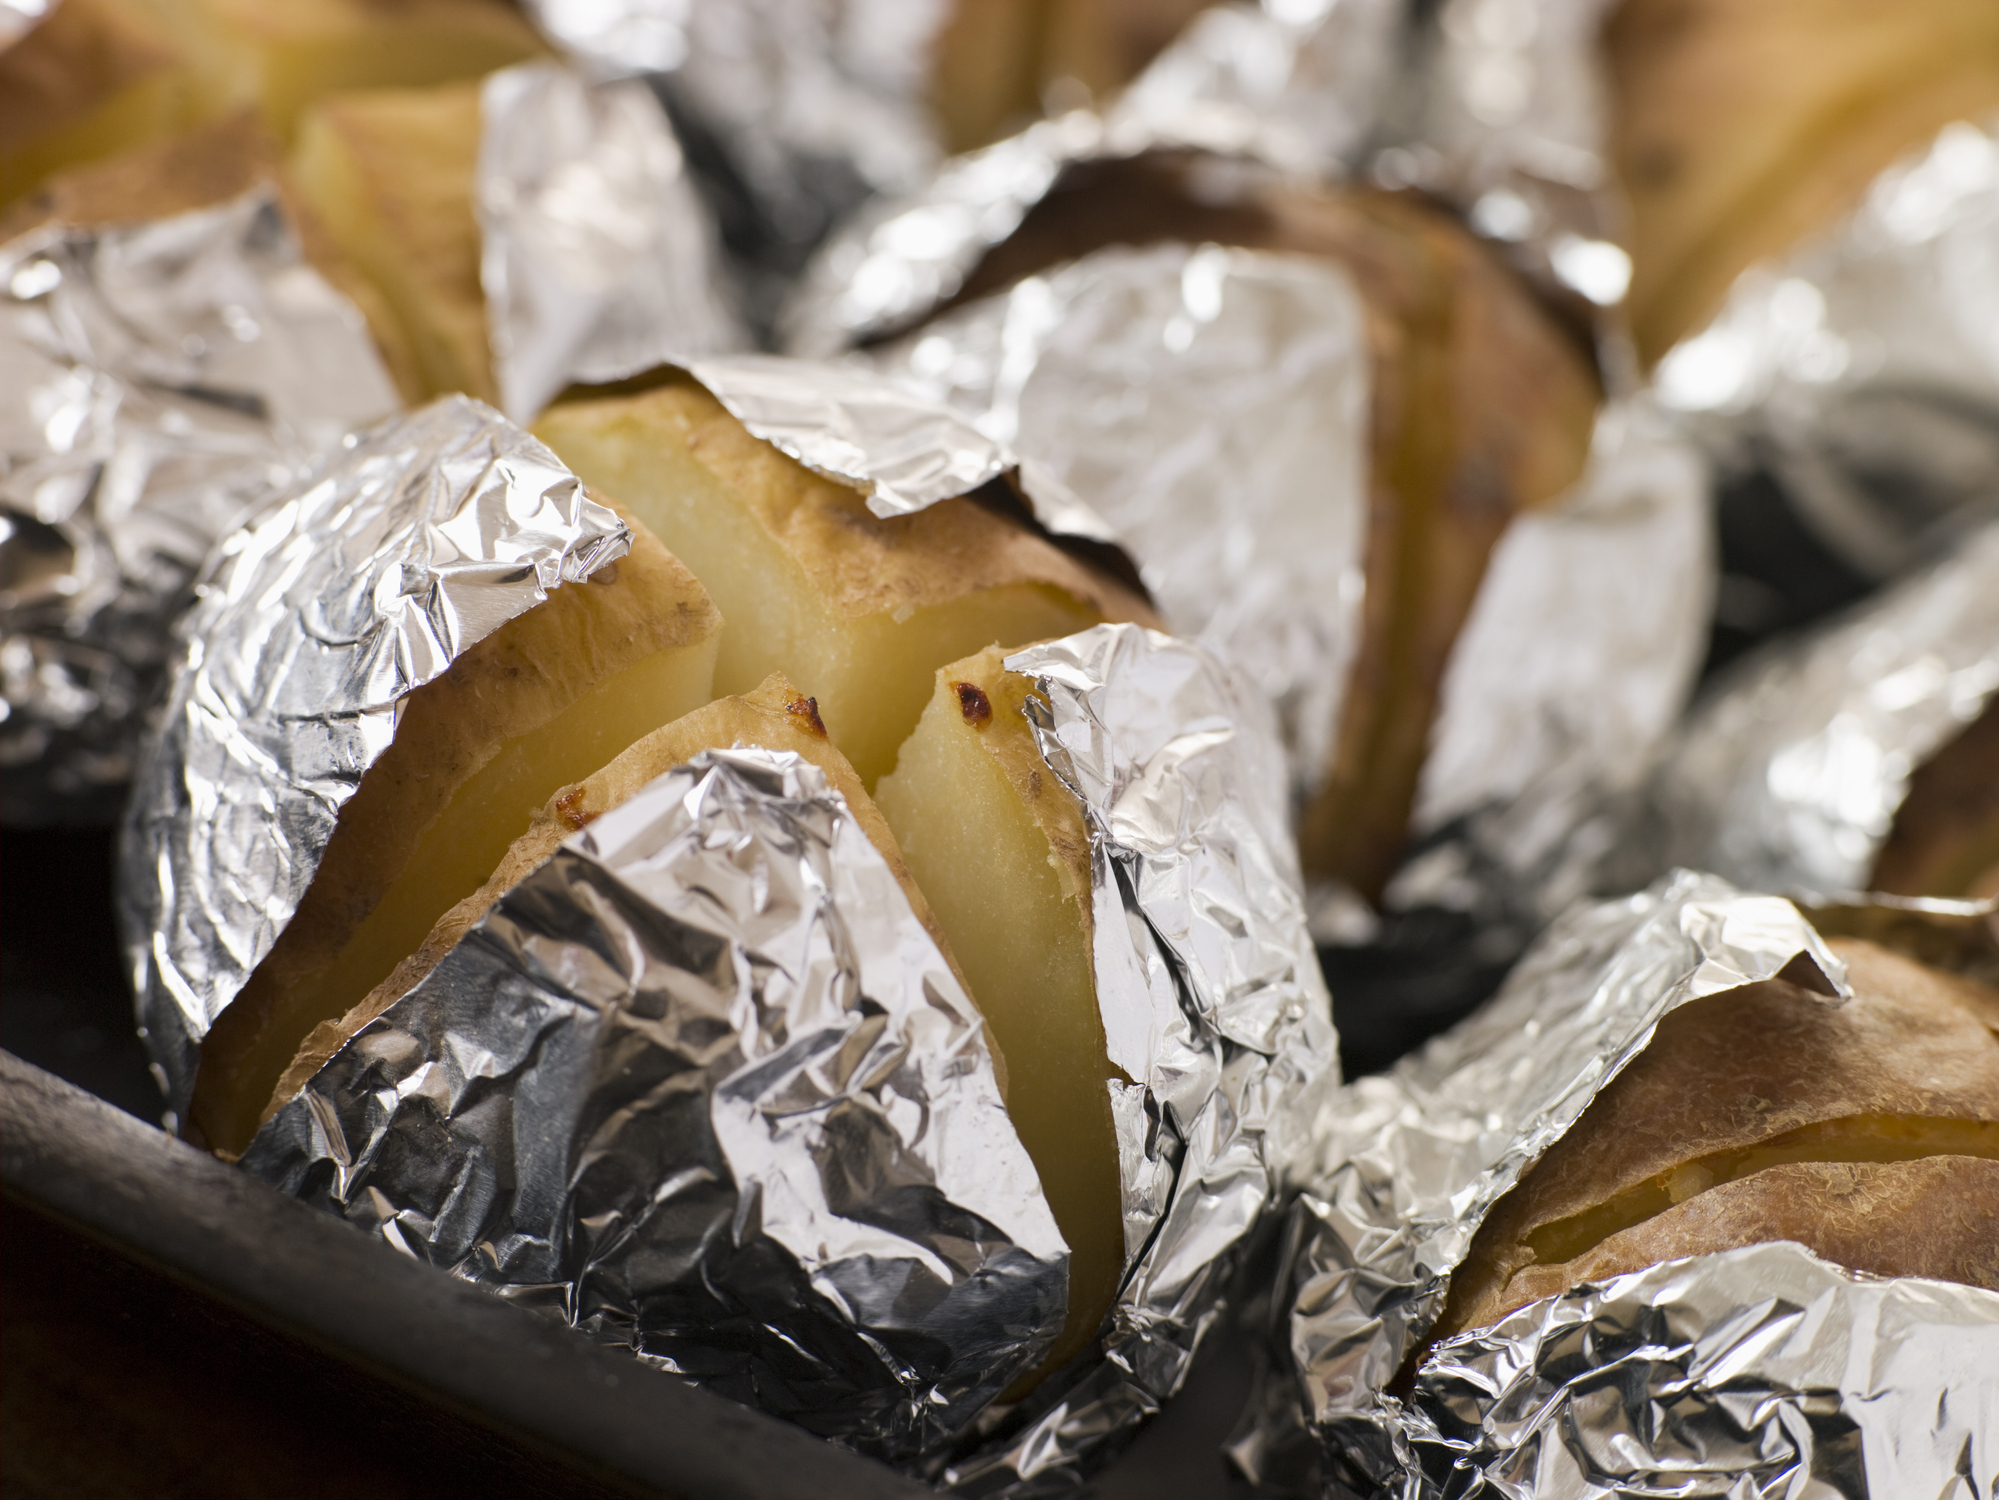 Why You Should Never Store Your Baked Potatoes in Foil